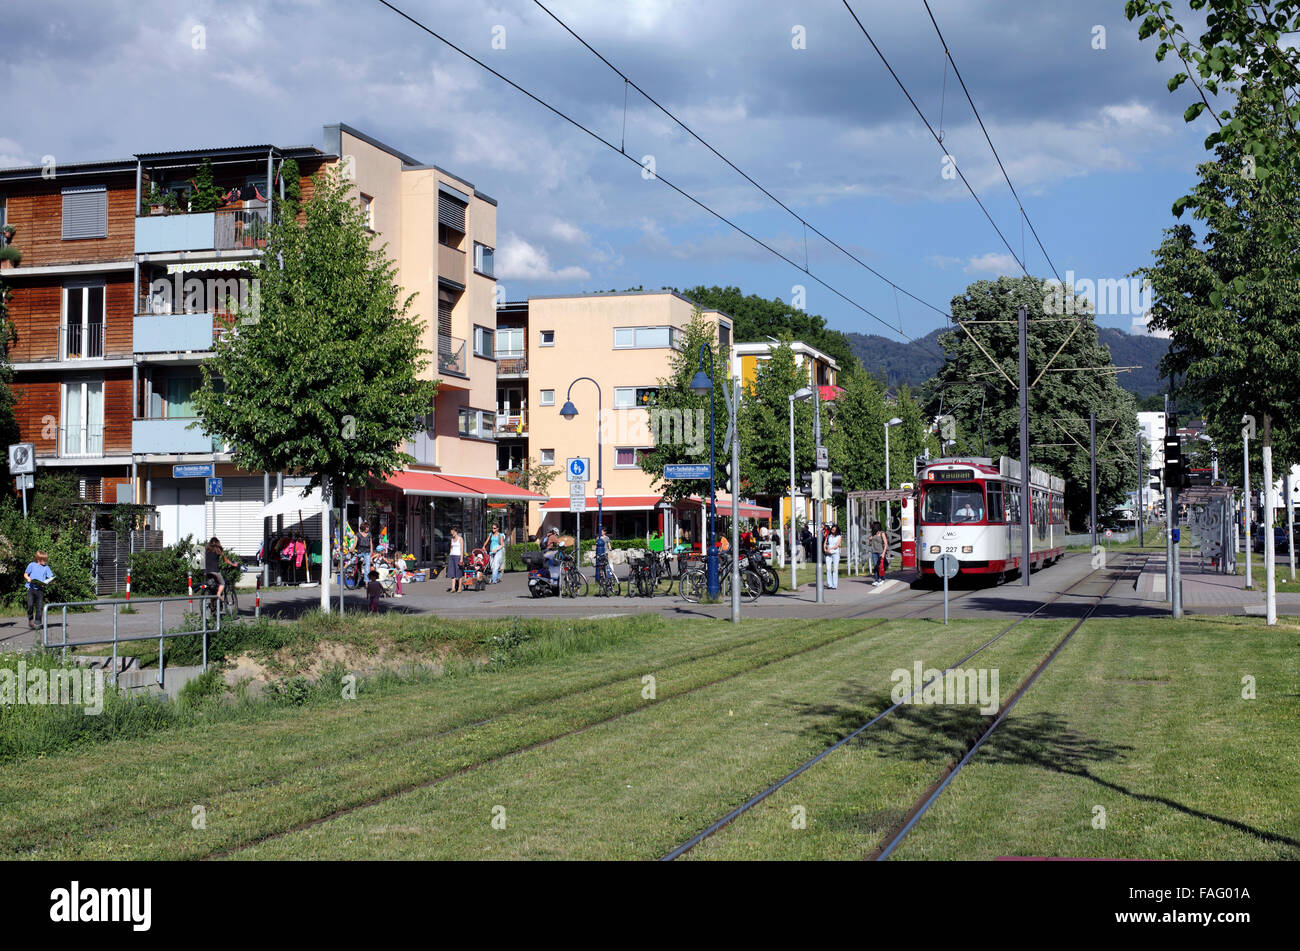 A tram in the centre of Vauban, a sustainable suburb of Freiburg im Breisgau, Germany. Stock Photo